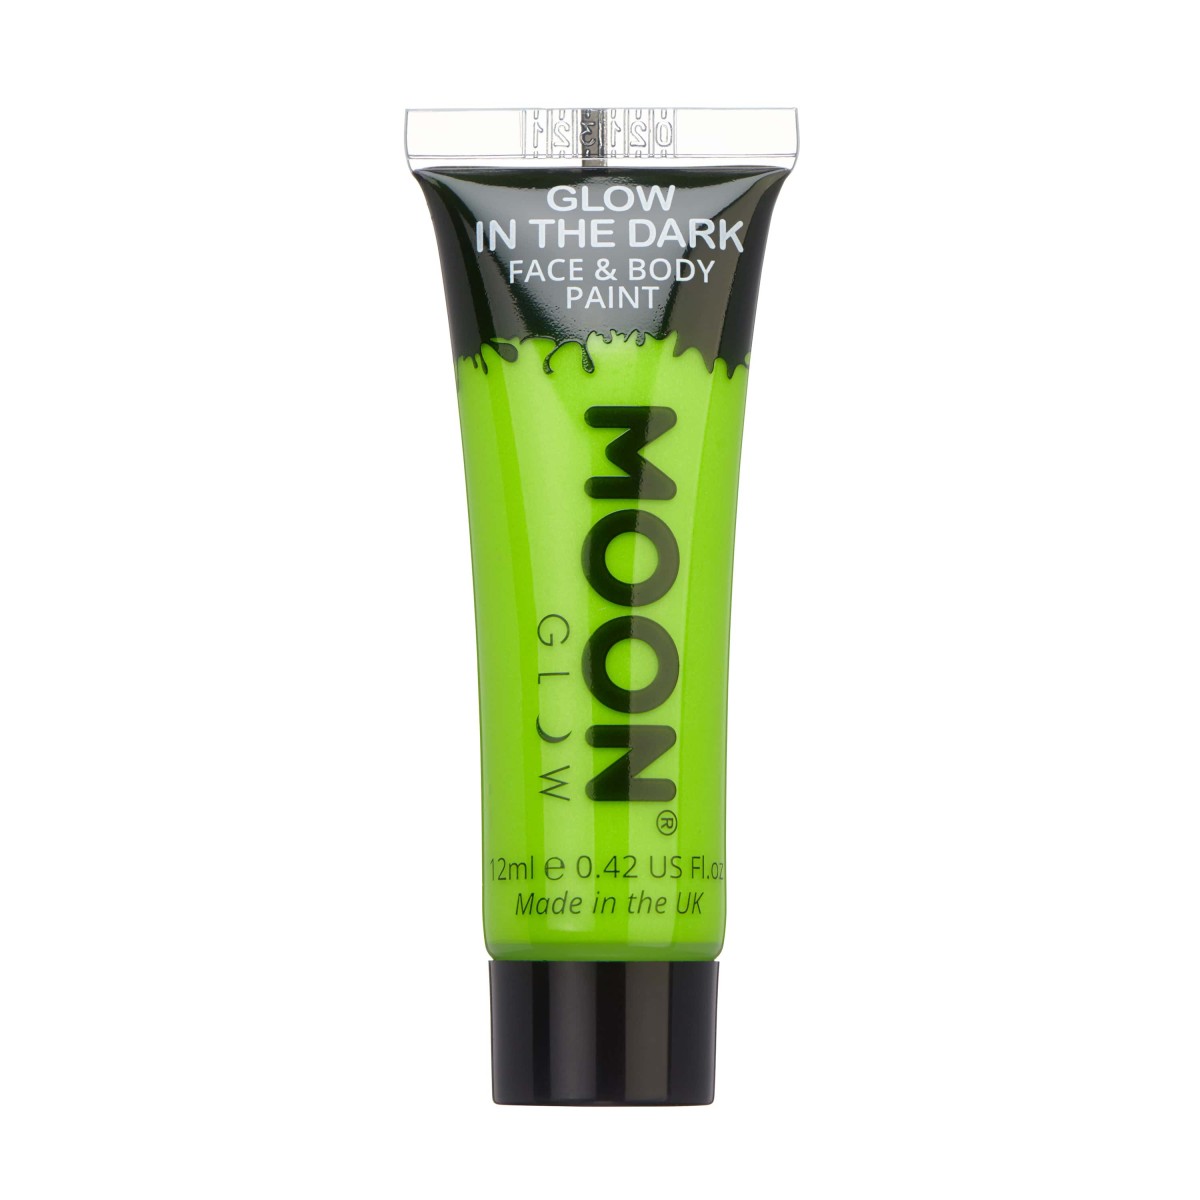 MOON CREATIONS M29 GLOW IN THE DARK FACE & BODY PAINT GREEN 12ml